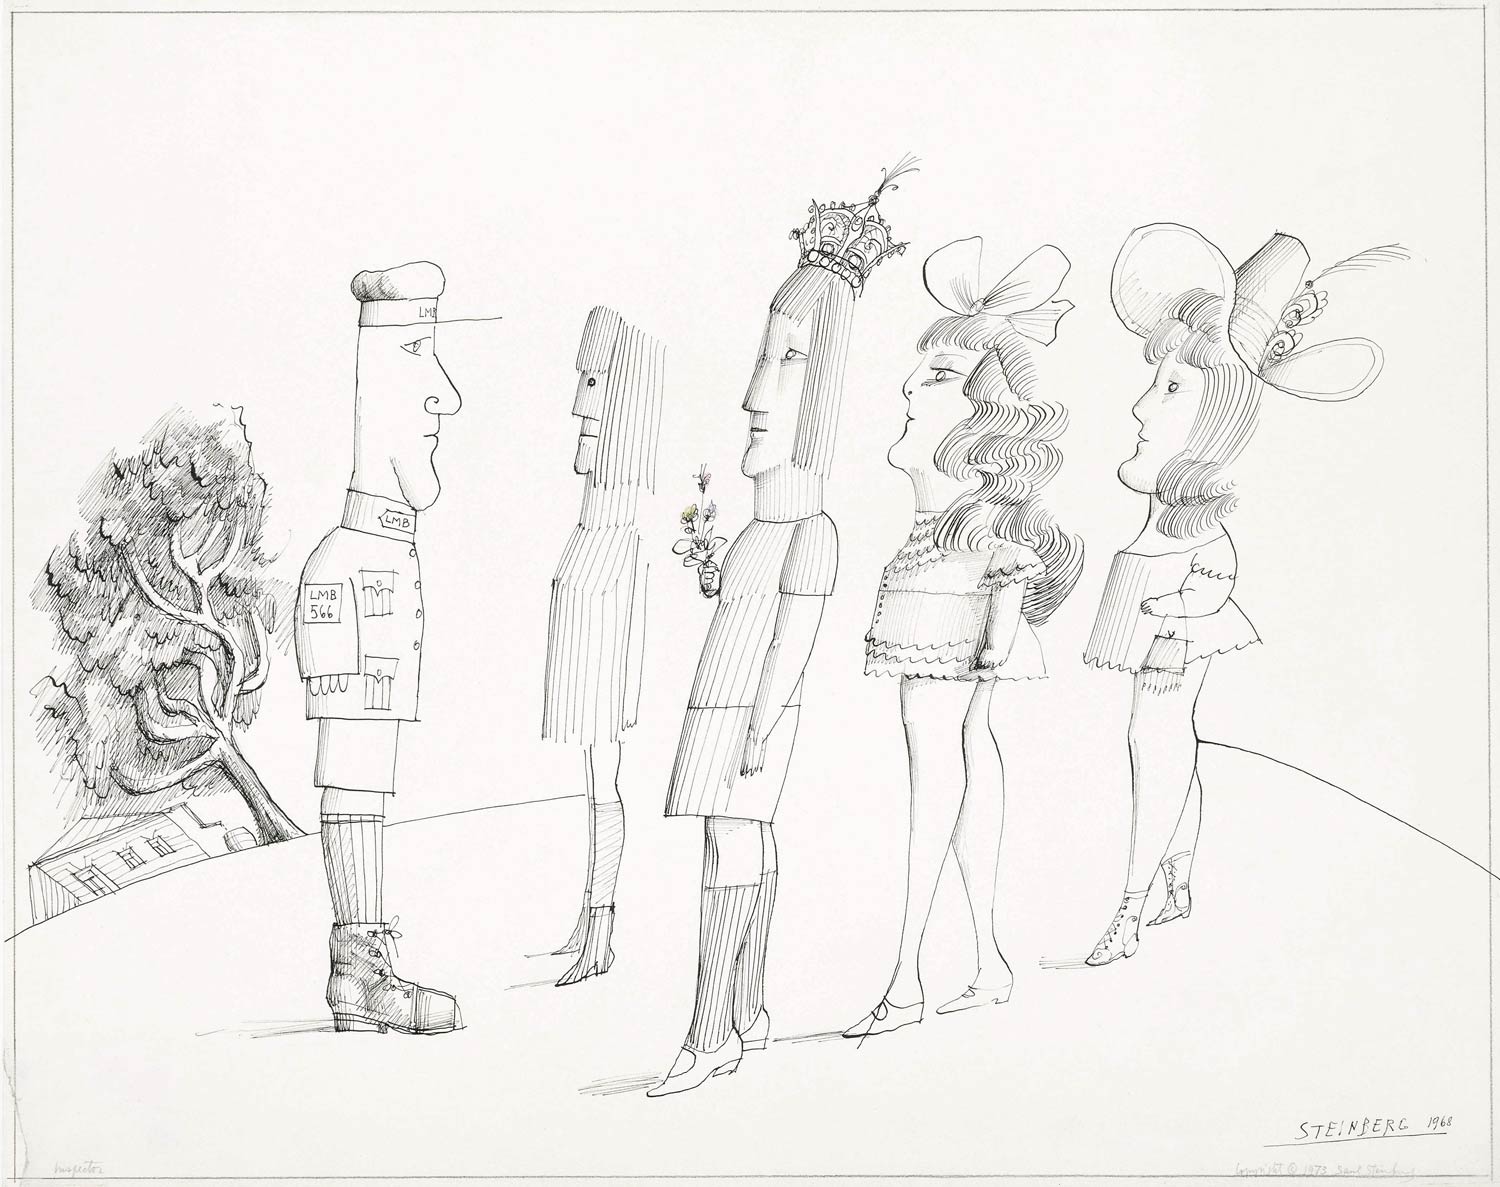 <em>LMB 566</em>, 1968. Ink on paper, 14 ¼ x 17 ¼ in. Private collection. In Steinberg’s self-portrait at left, he wears the armband of his school (Liceul Matei Basarab) and his student number.